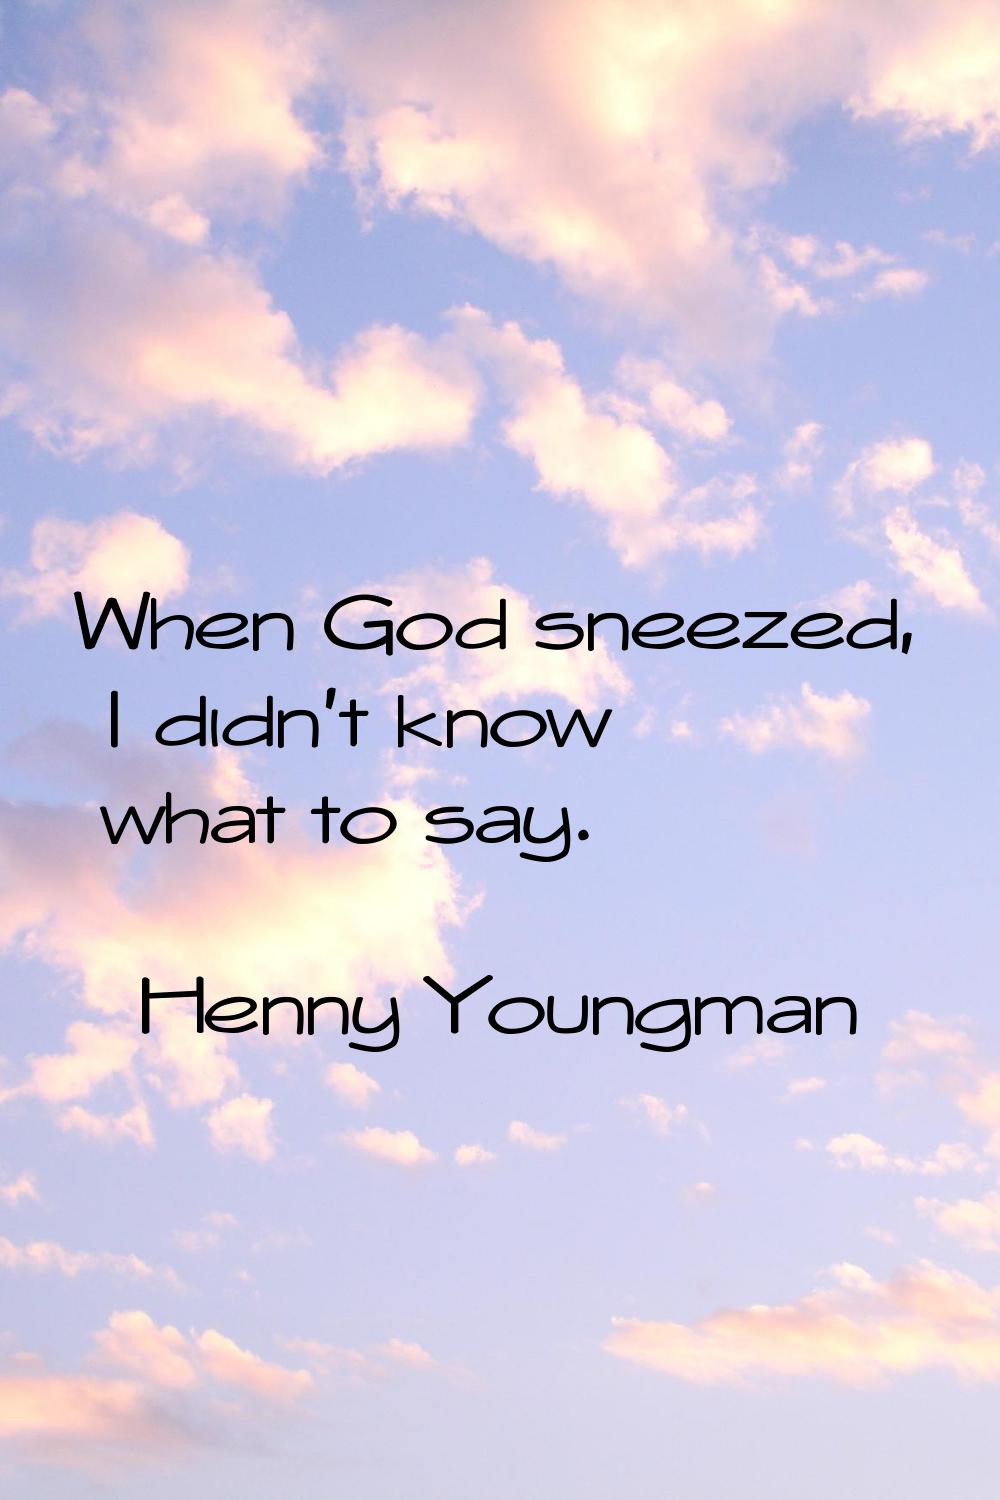 When God sneezed, I didn't know what to say.